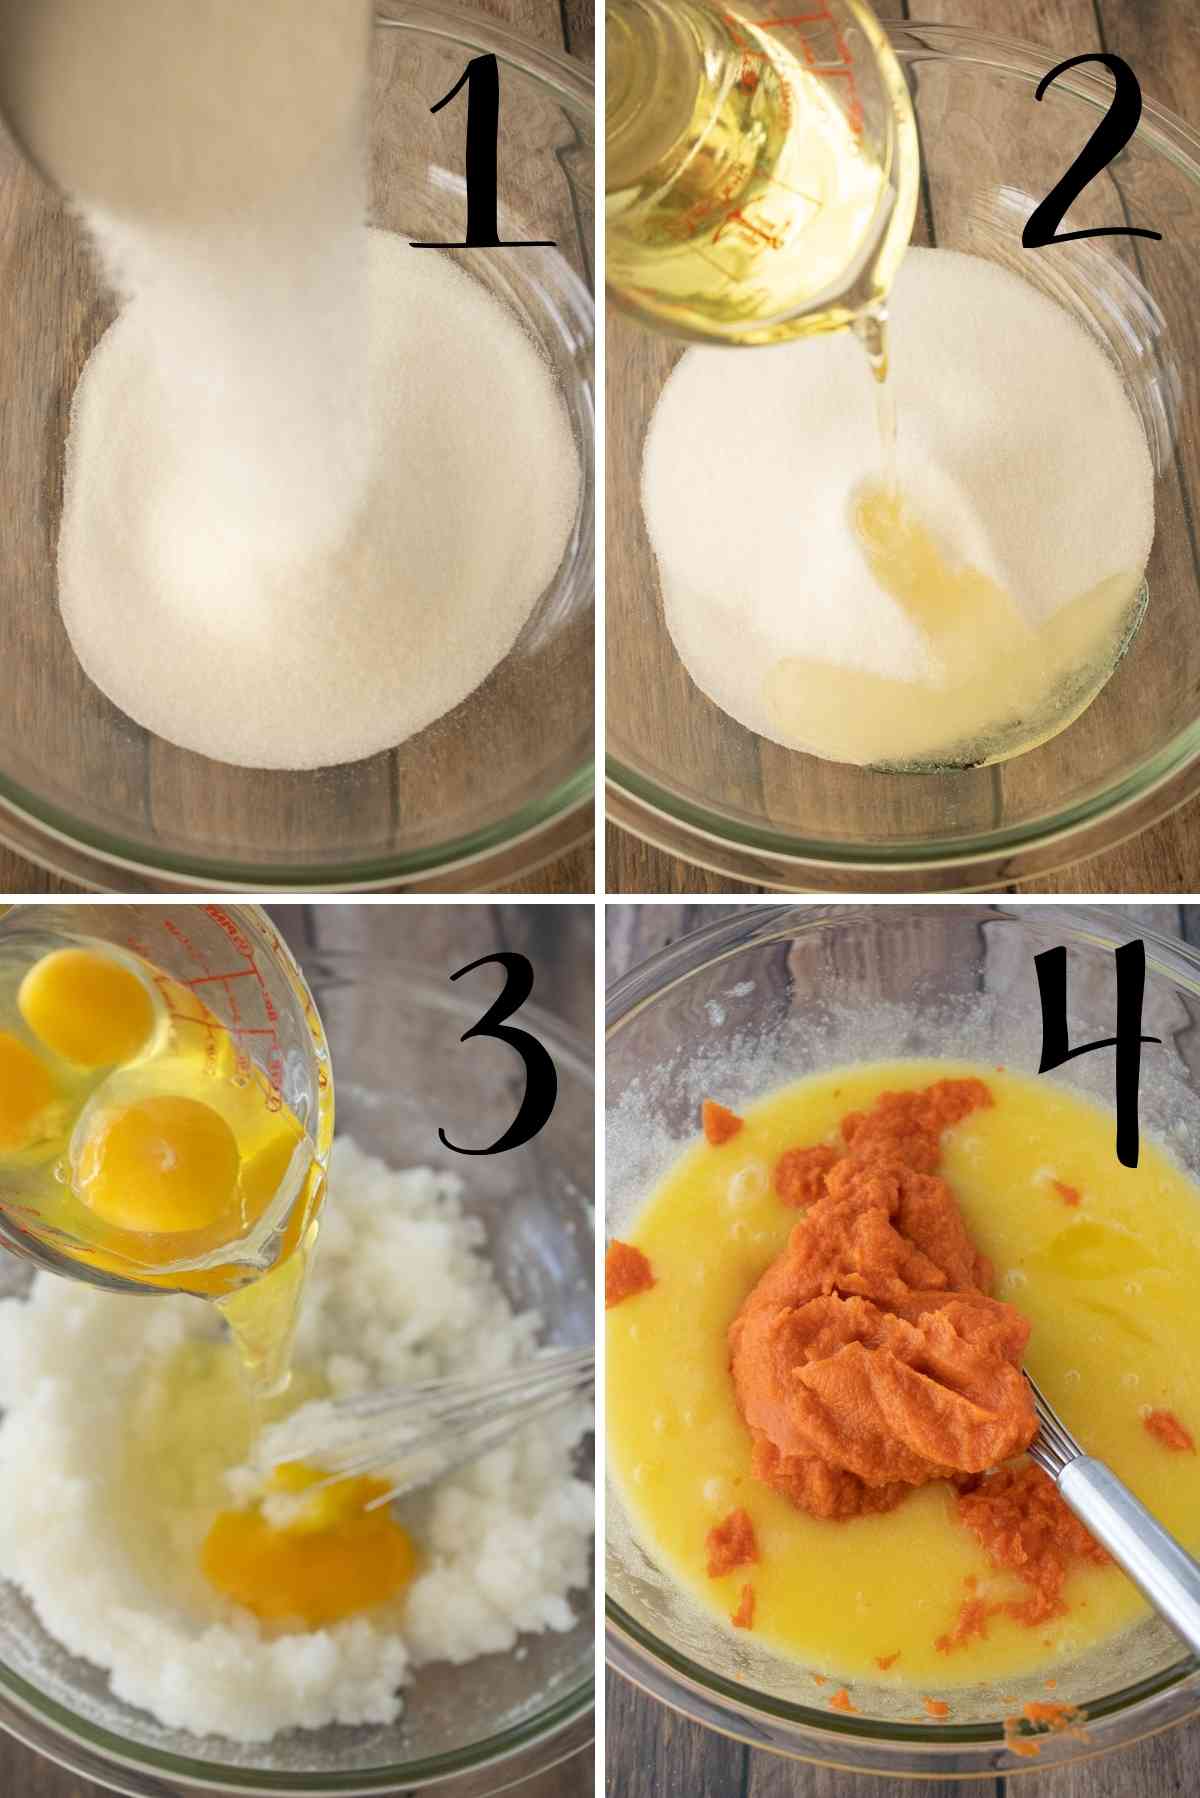 Sugar, oil, eggs and pureed carrots mixed in a bowl.